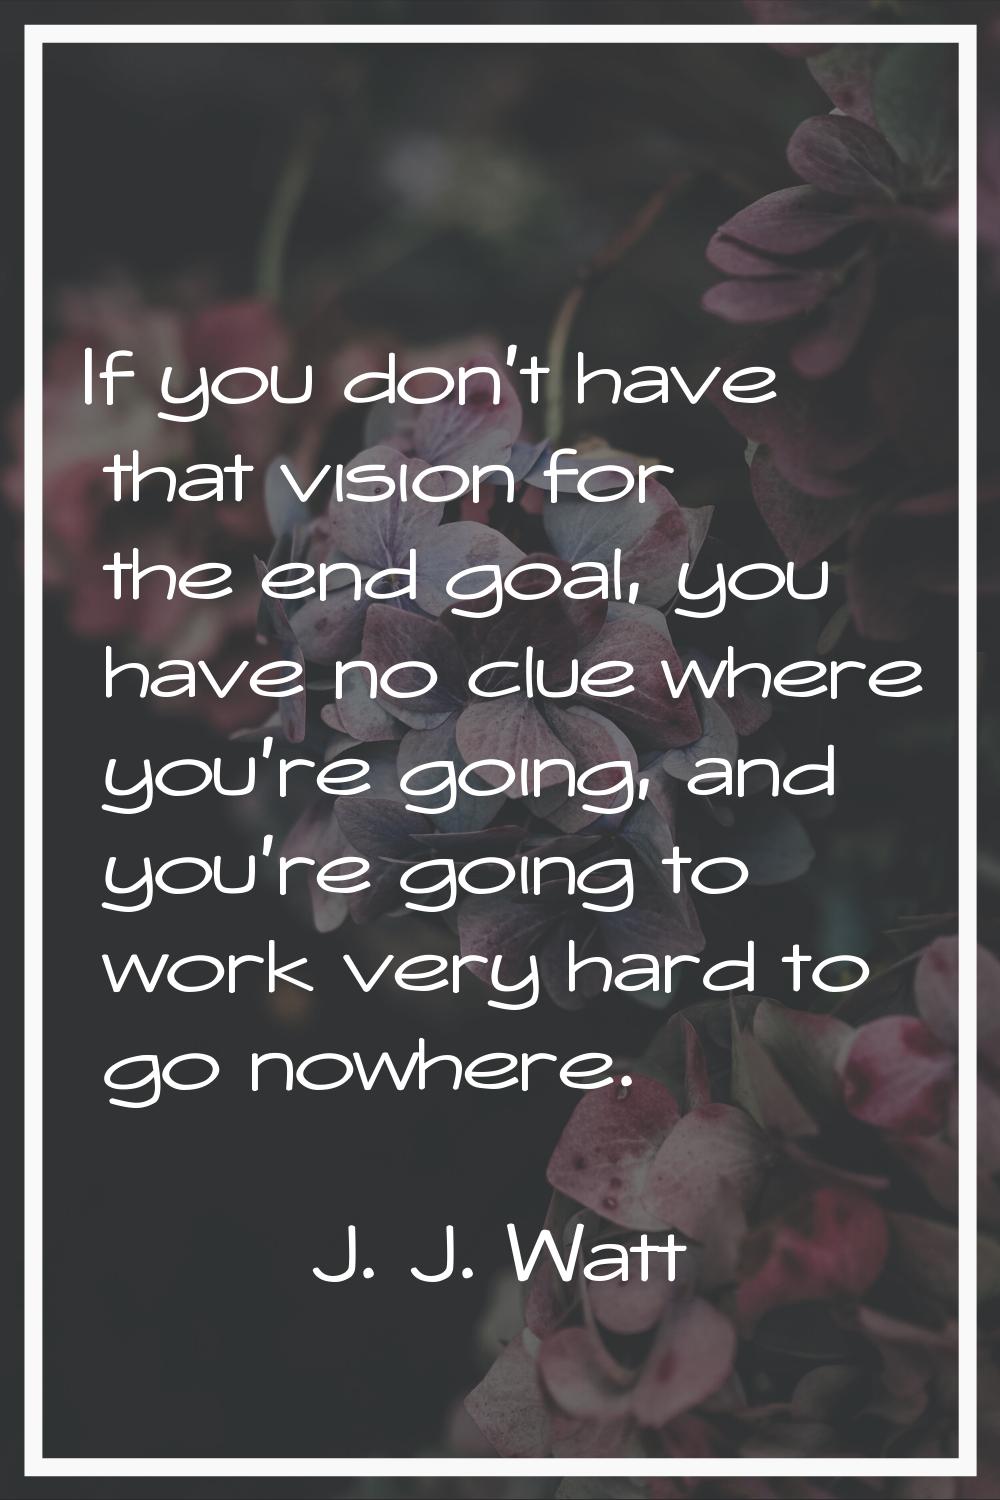 If you don't have that vision for the end goal, you have no clue where you're going, and you're goi